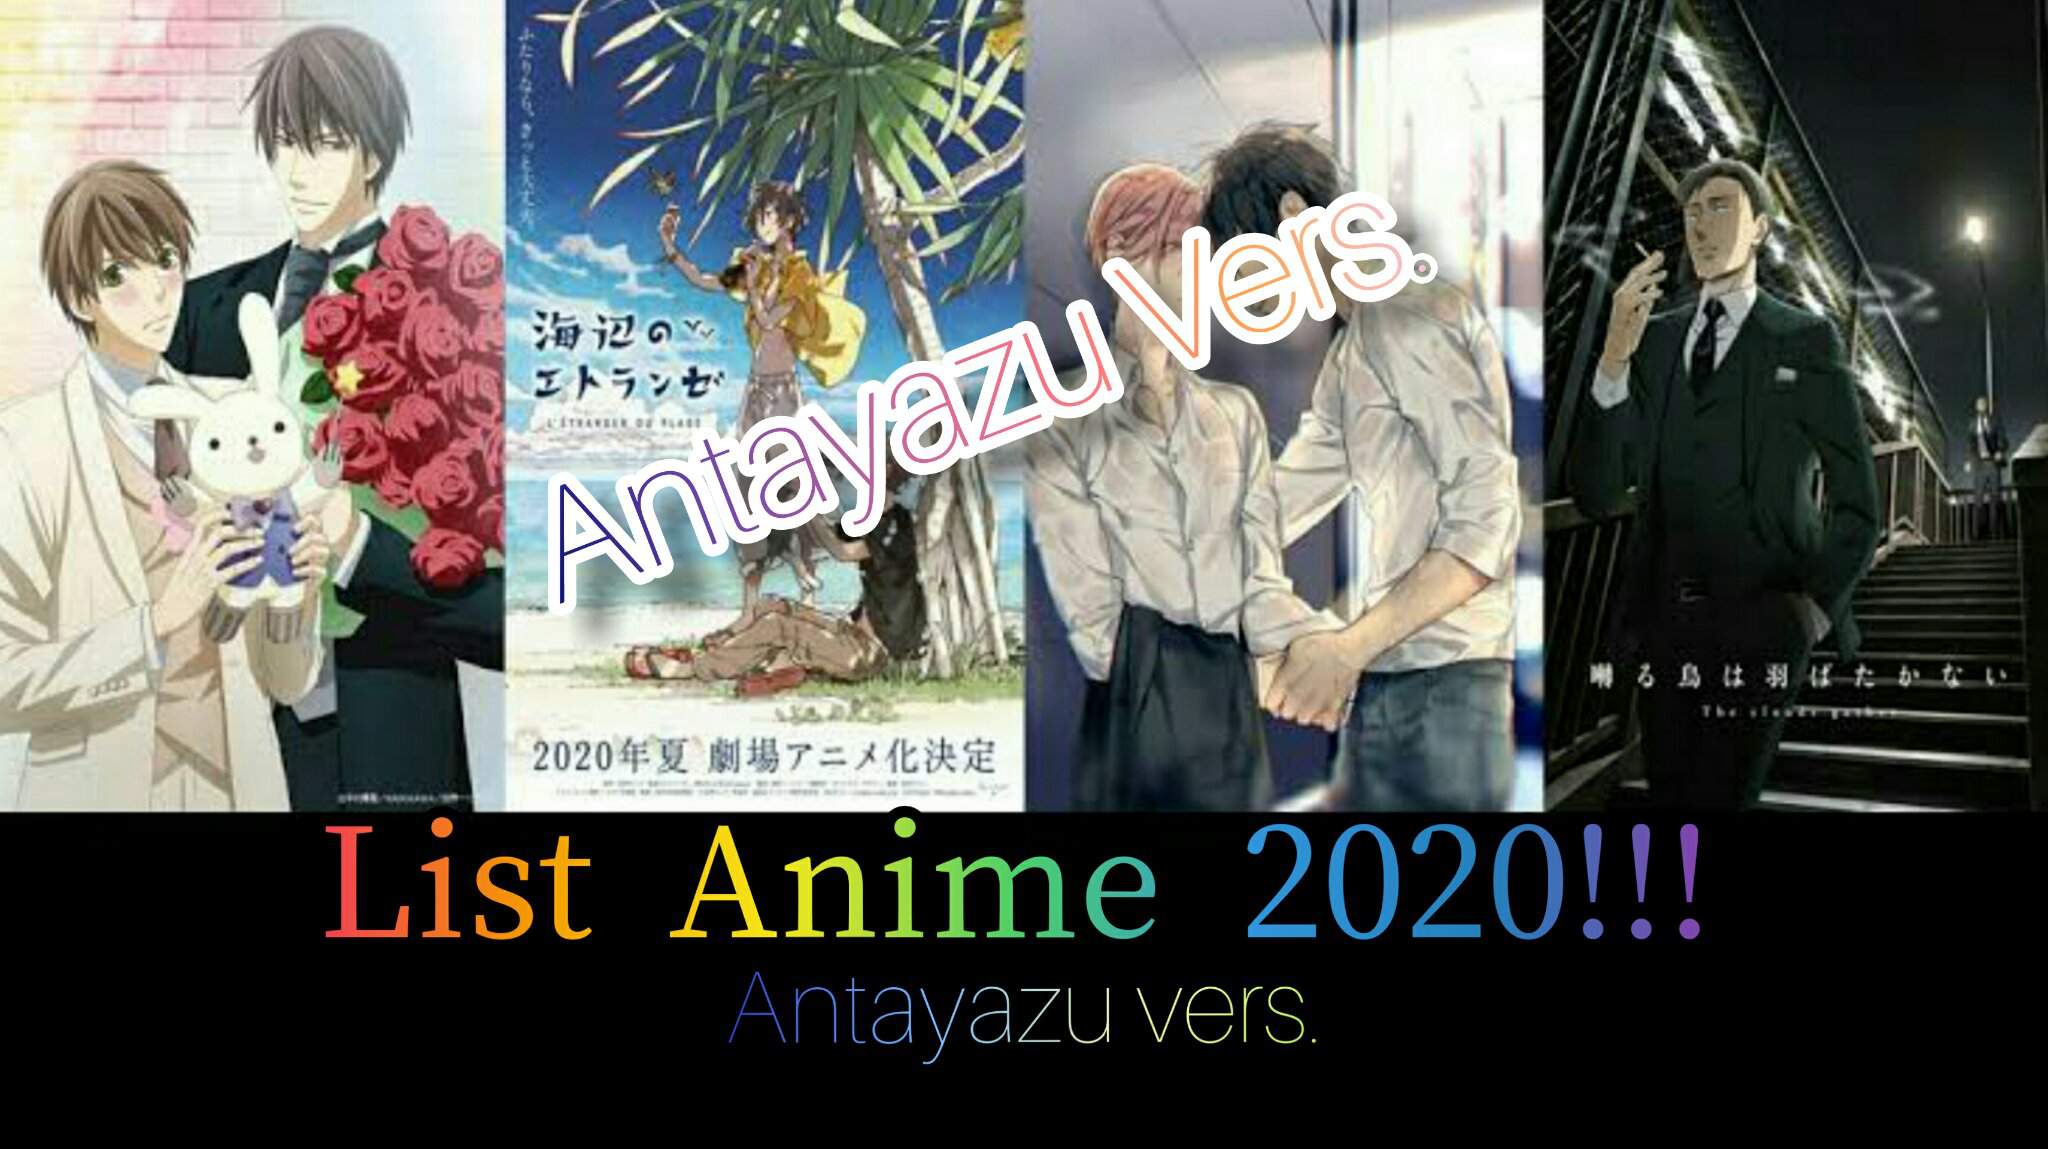 bl anime movies to watch